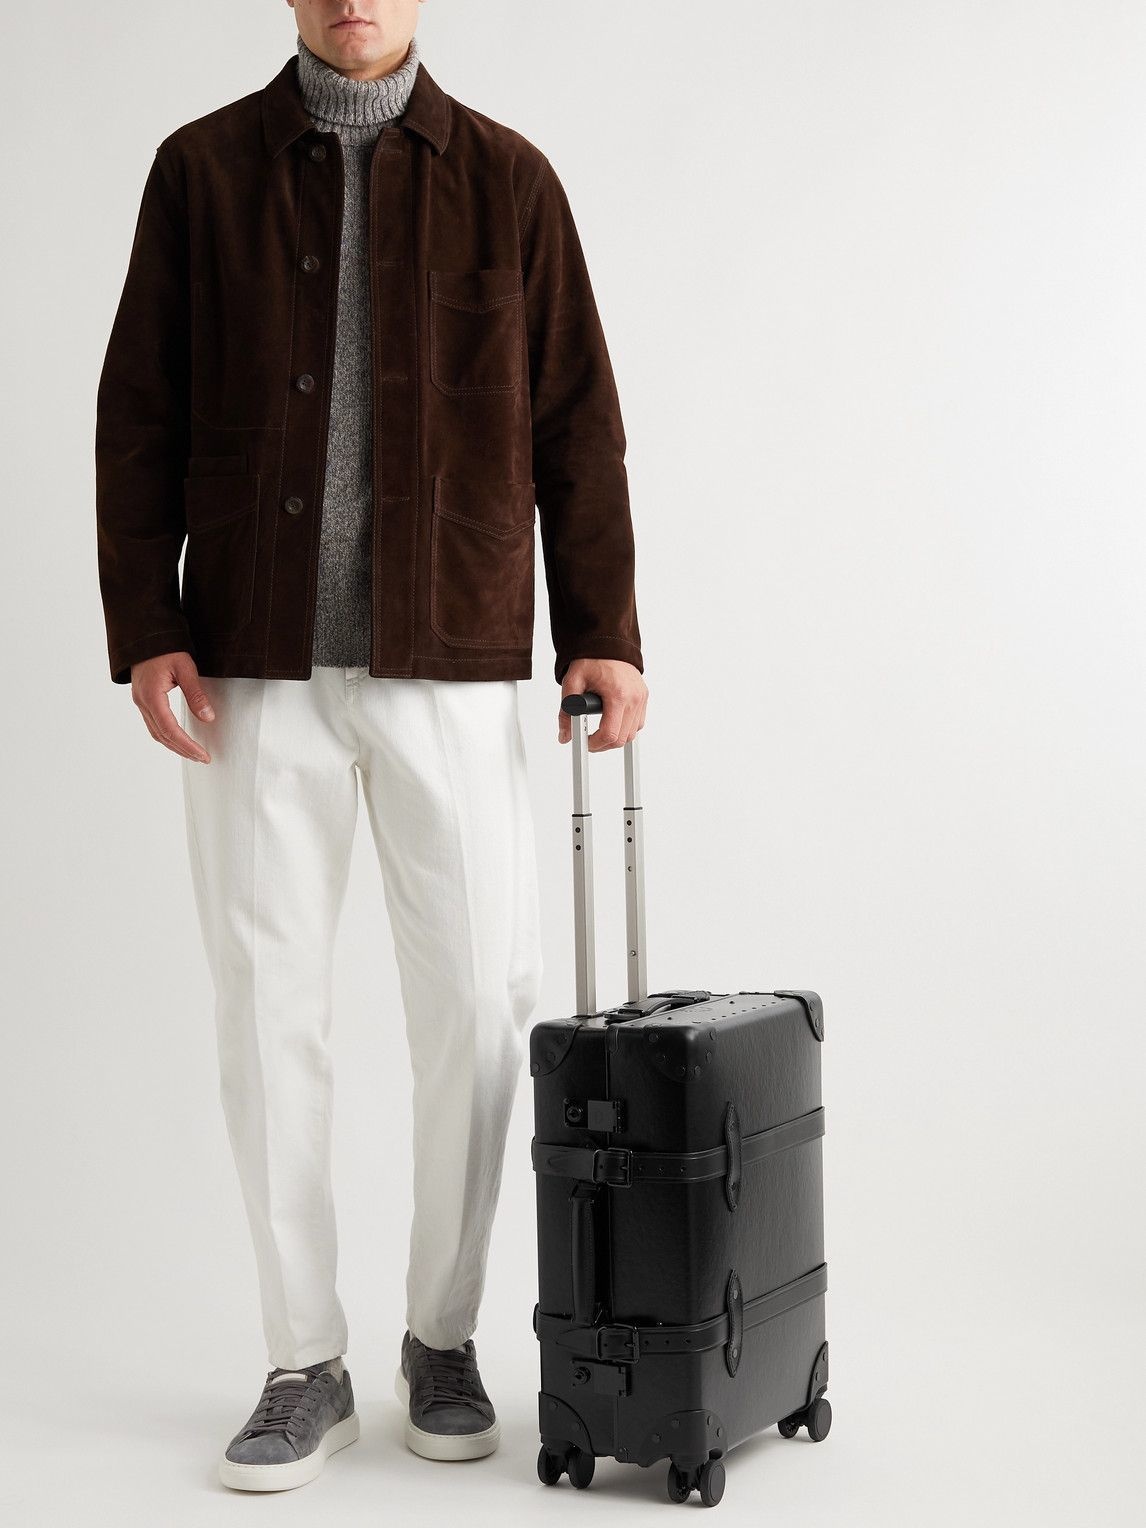 Globe-Trotter - Centenary Leather-Trimmed Carry-On Suitcase Globe-Trotter